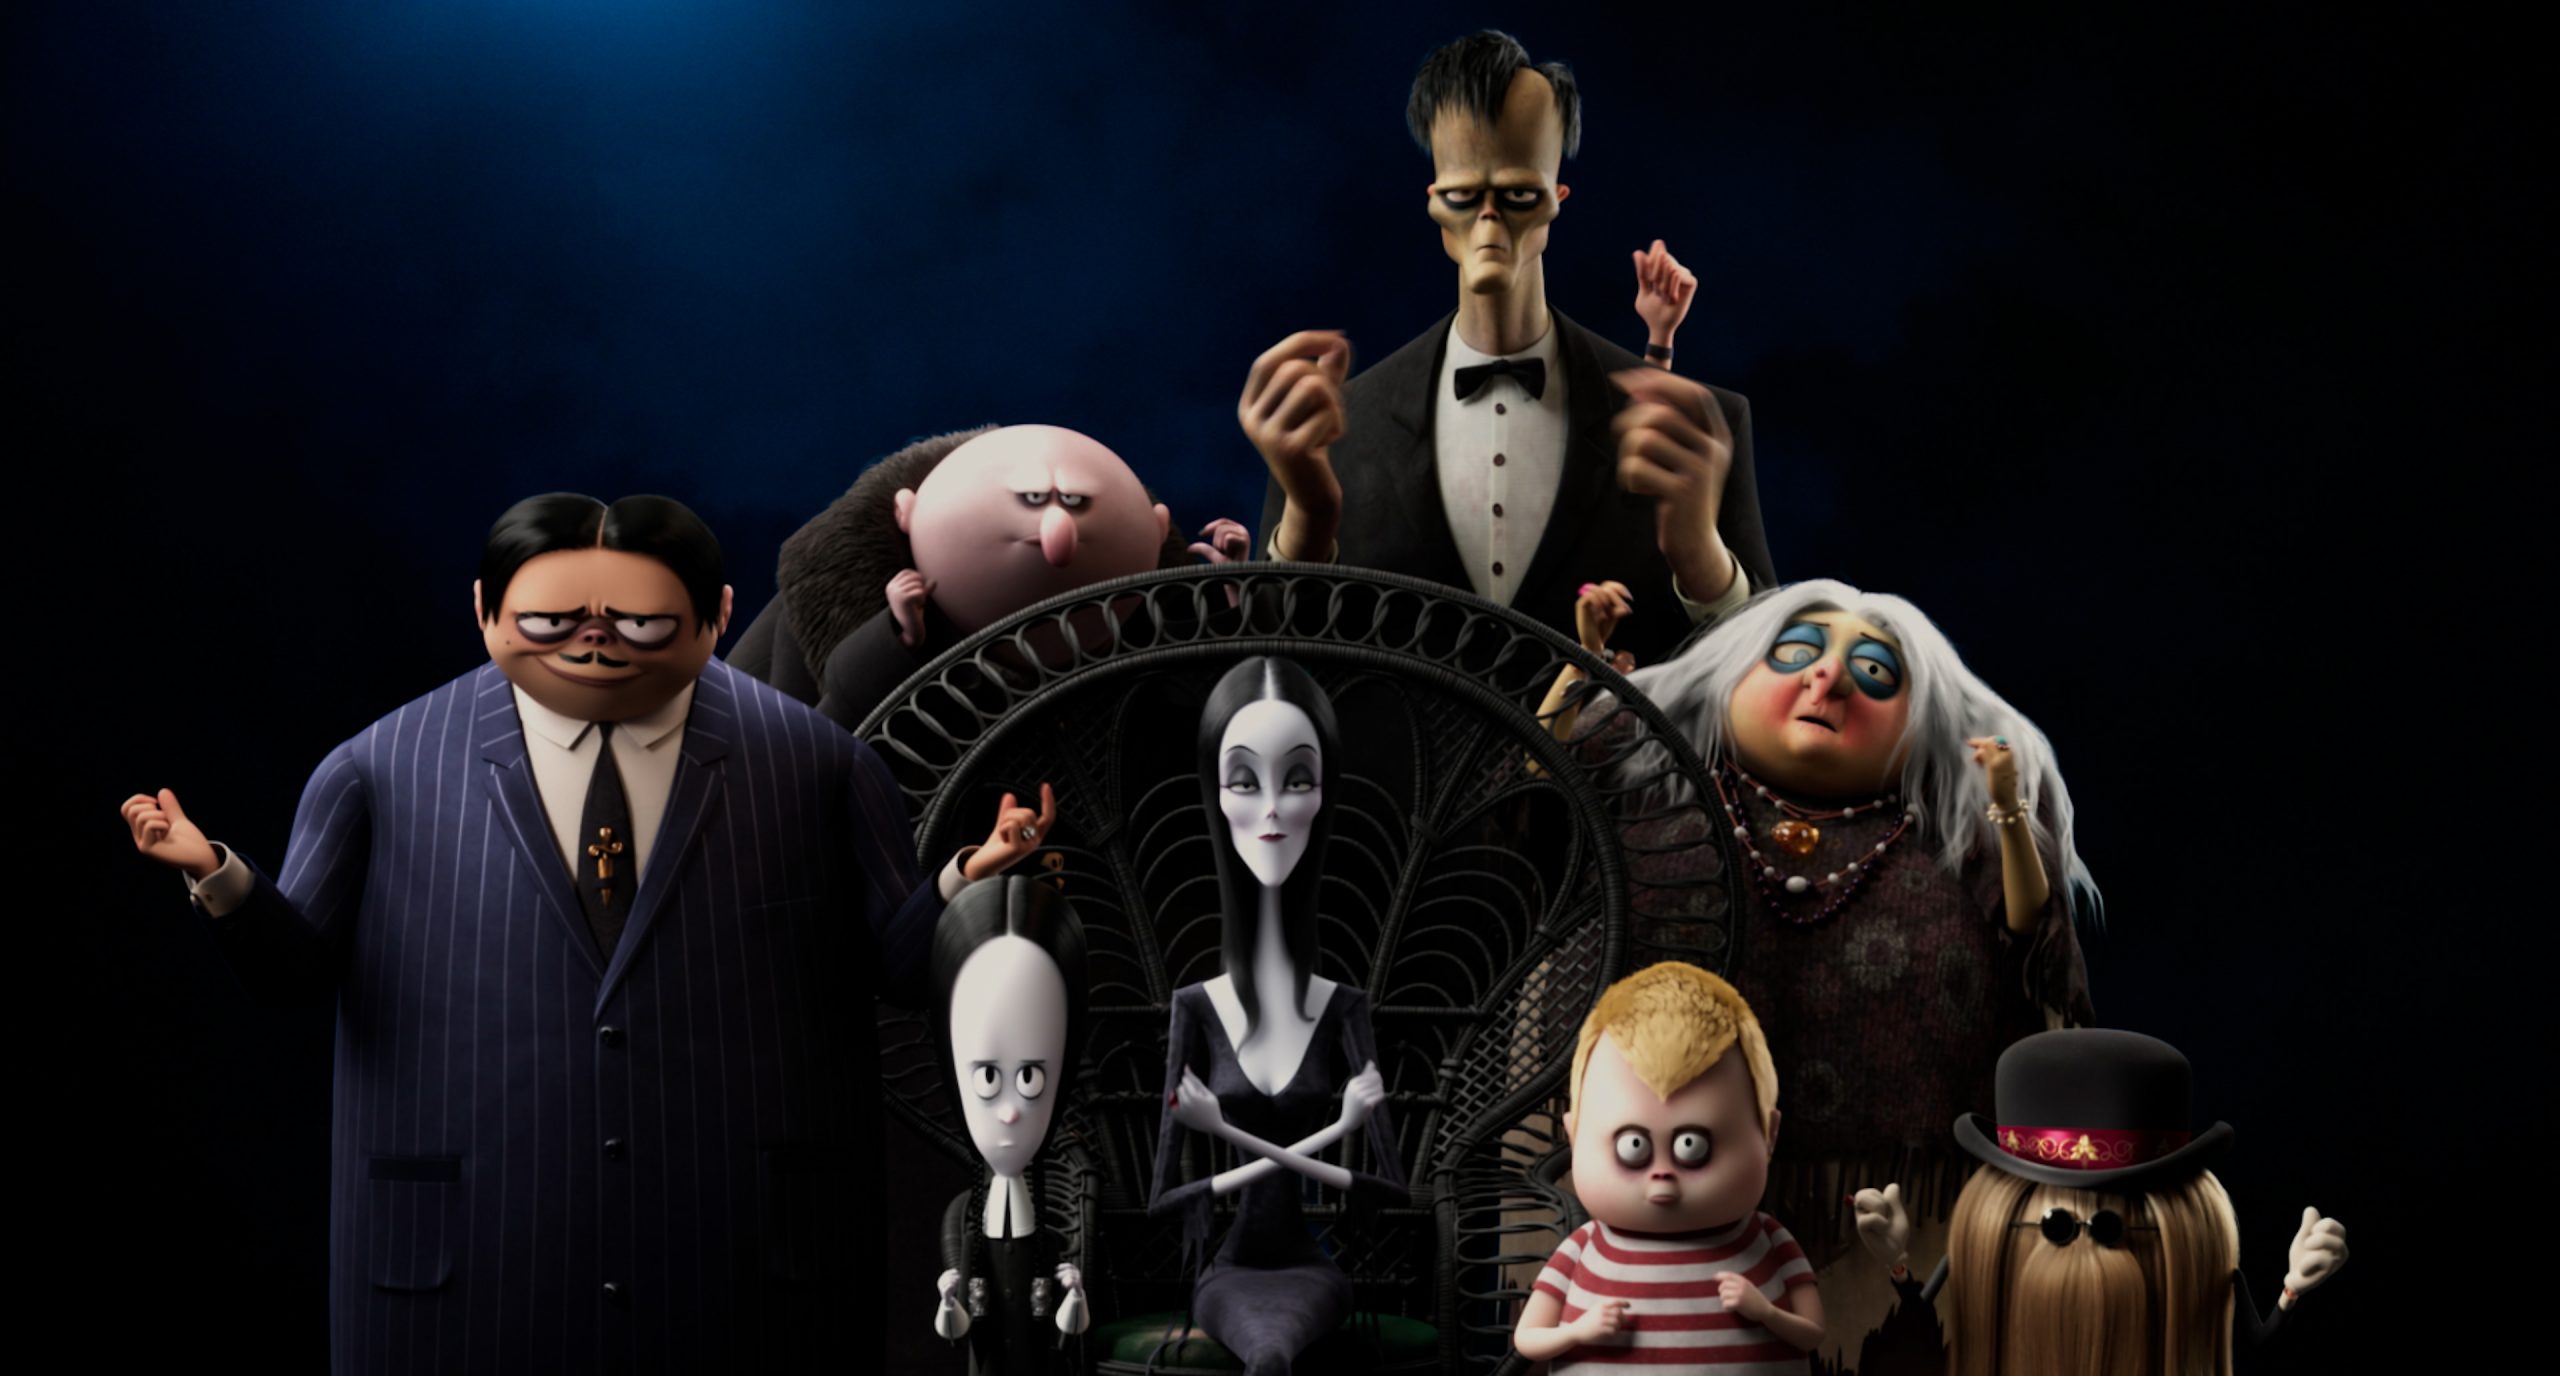 REVIEW: 'The Addams Family 2' a harmless animated sequel that families can  enjoy together for Halloween